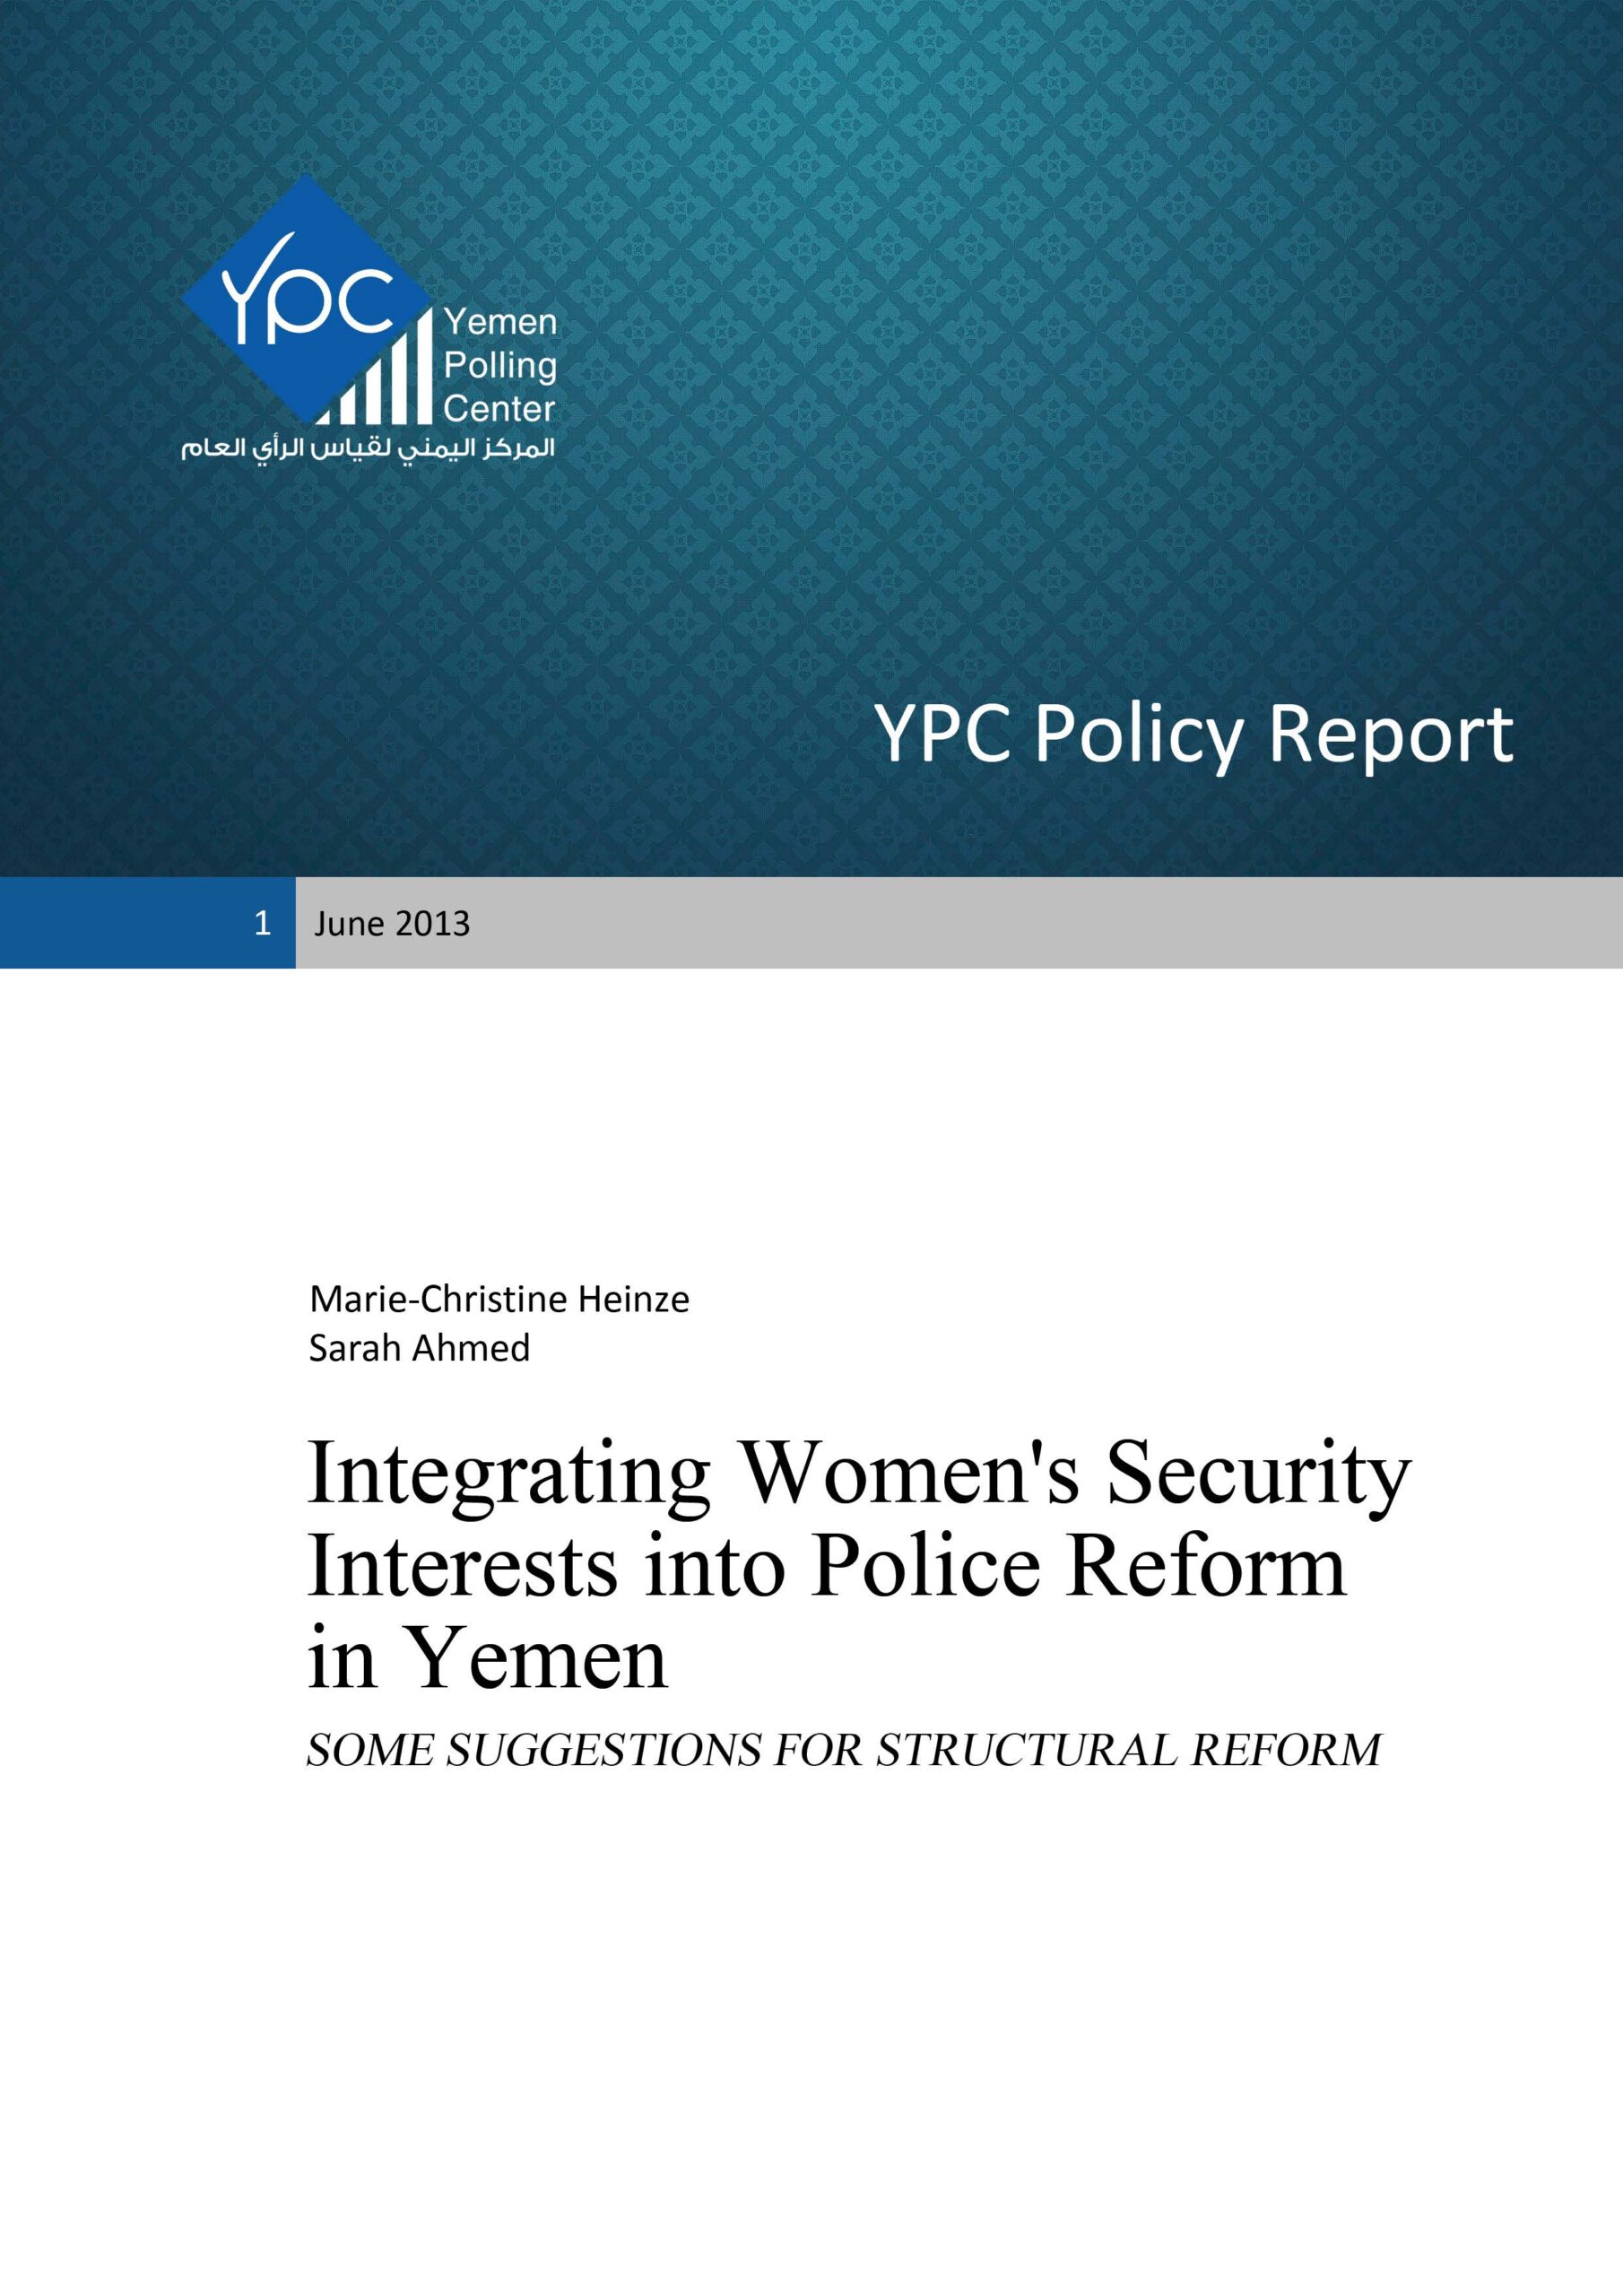 YPCPublications_Integrating-Womens-Security-Interests-in-Police-Reform-in-Yemen-Some-Suggestions-for-Structural-Reform---June-2013